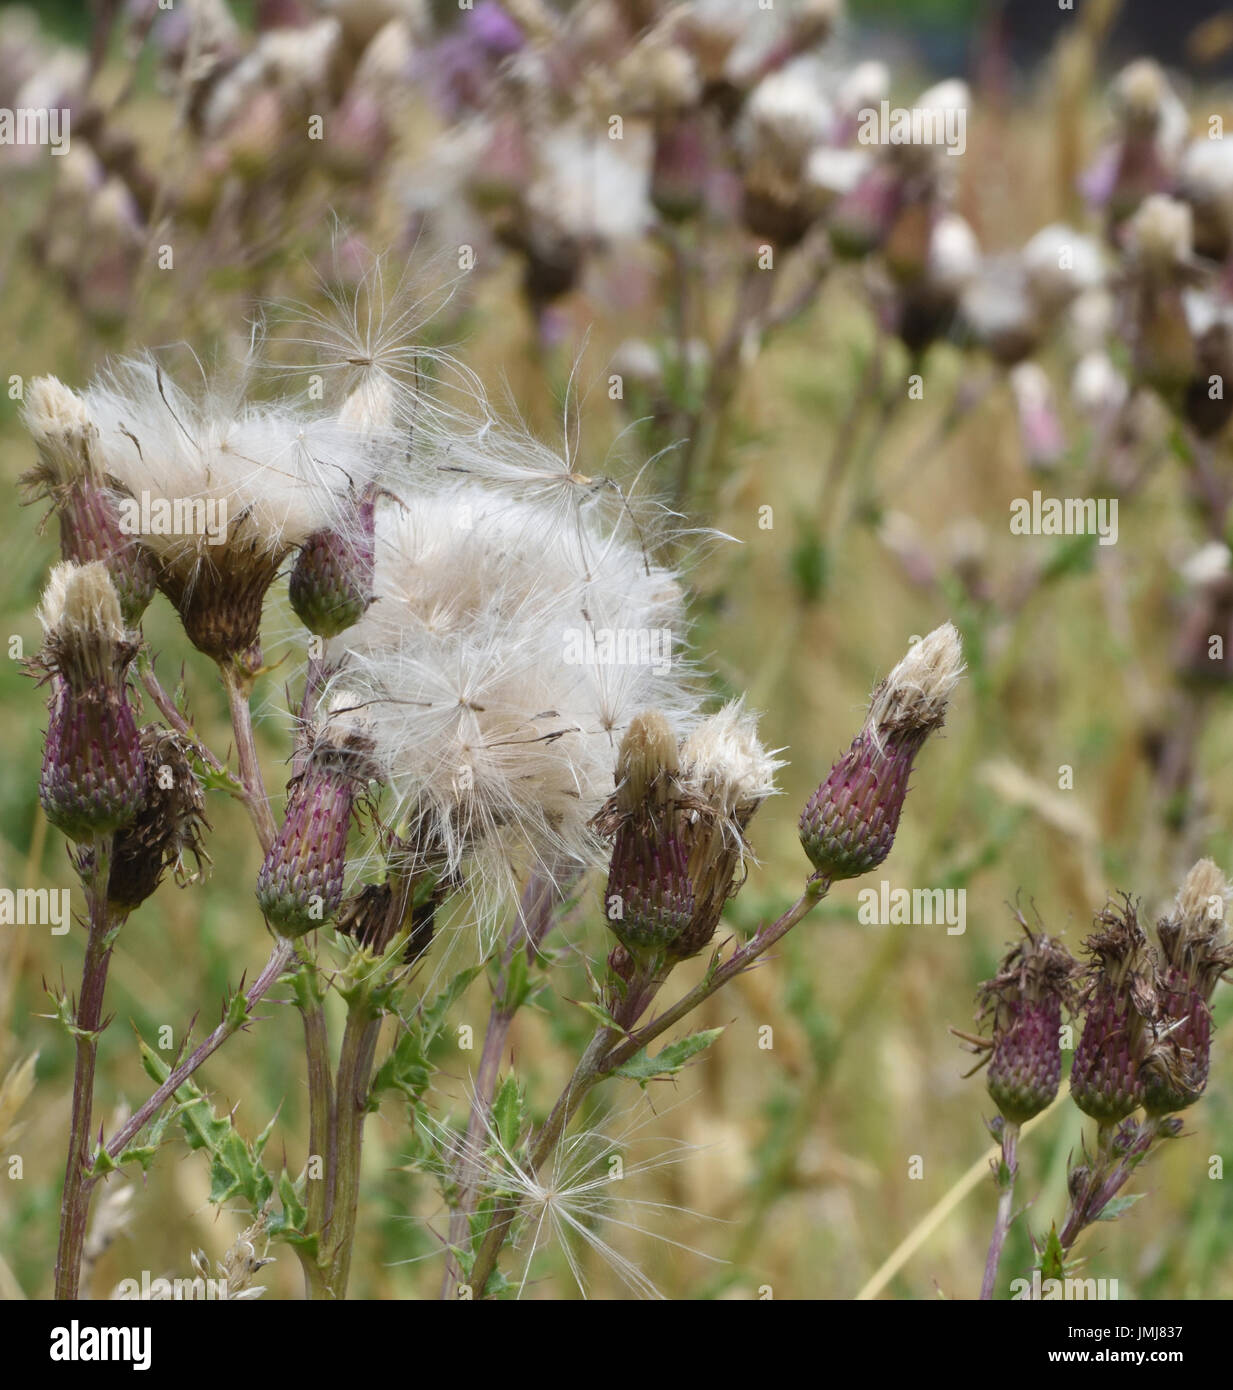 Seed heads of Creeping Thistle (Cirsium arvense) with wind dispersed thistle down. Bedgebury Forest, Kent, UK. Stock Photo